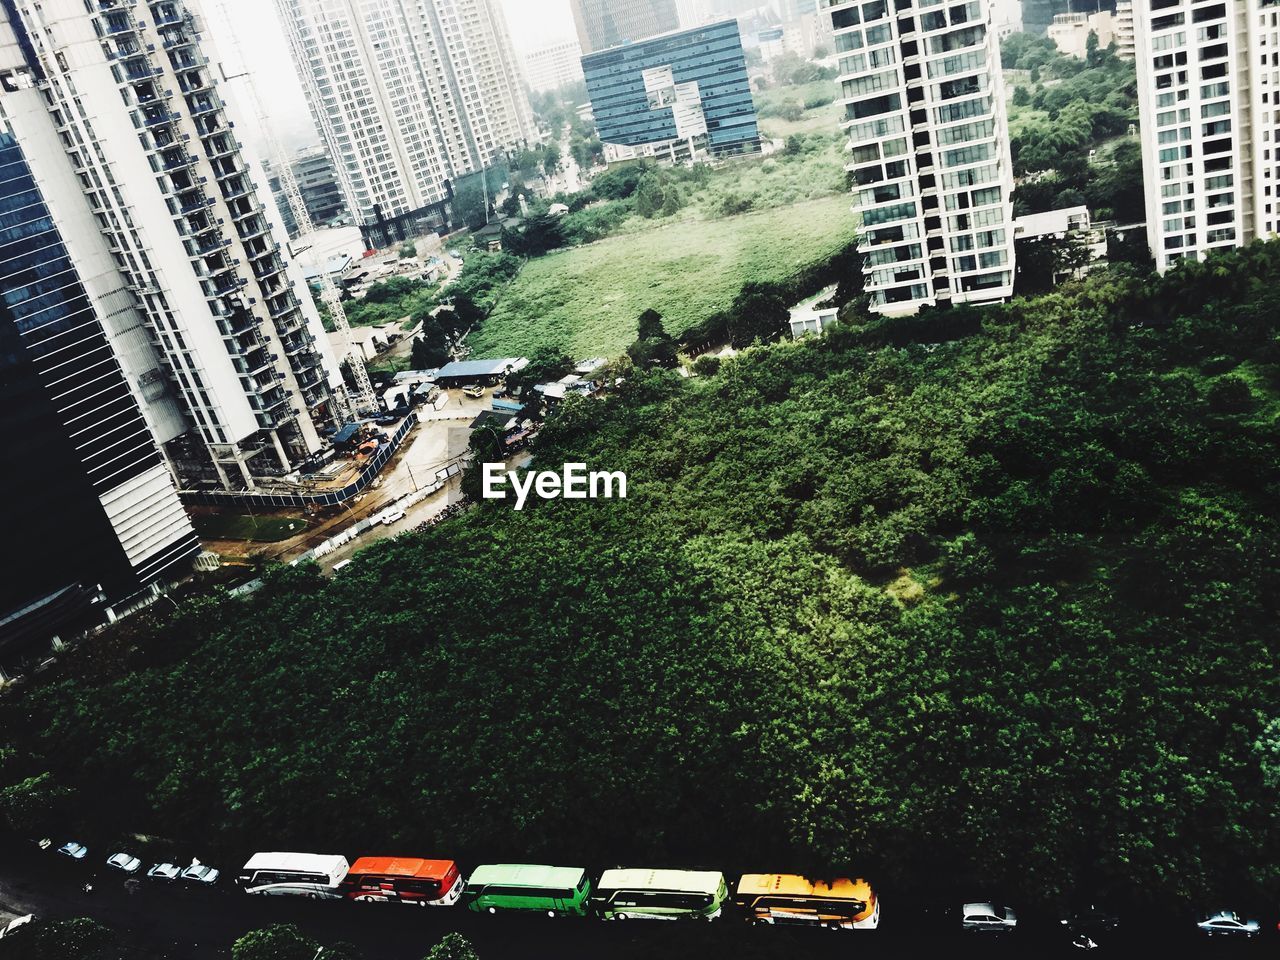 HIGH ANGLE VIEW OF CITY BUILDINGS AND TREES